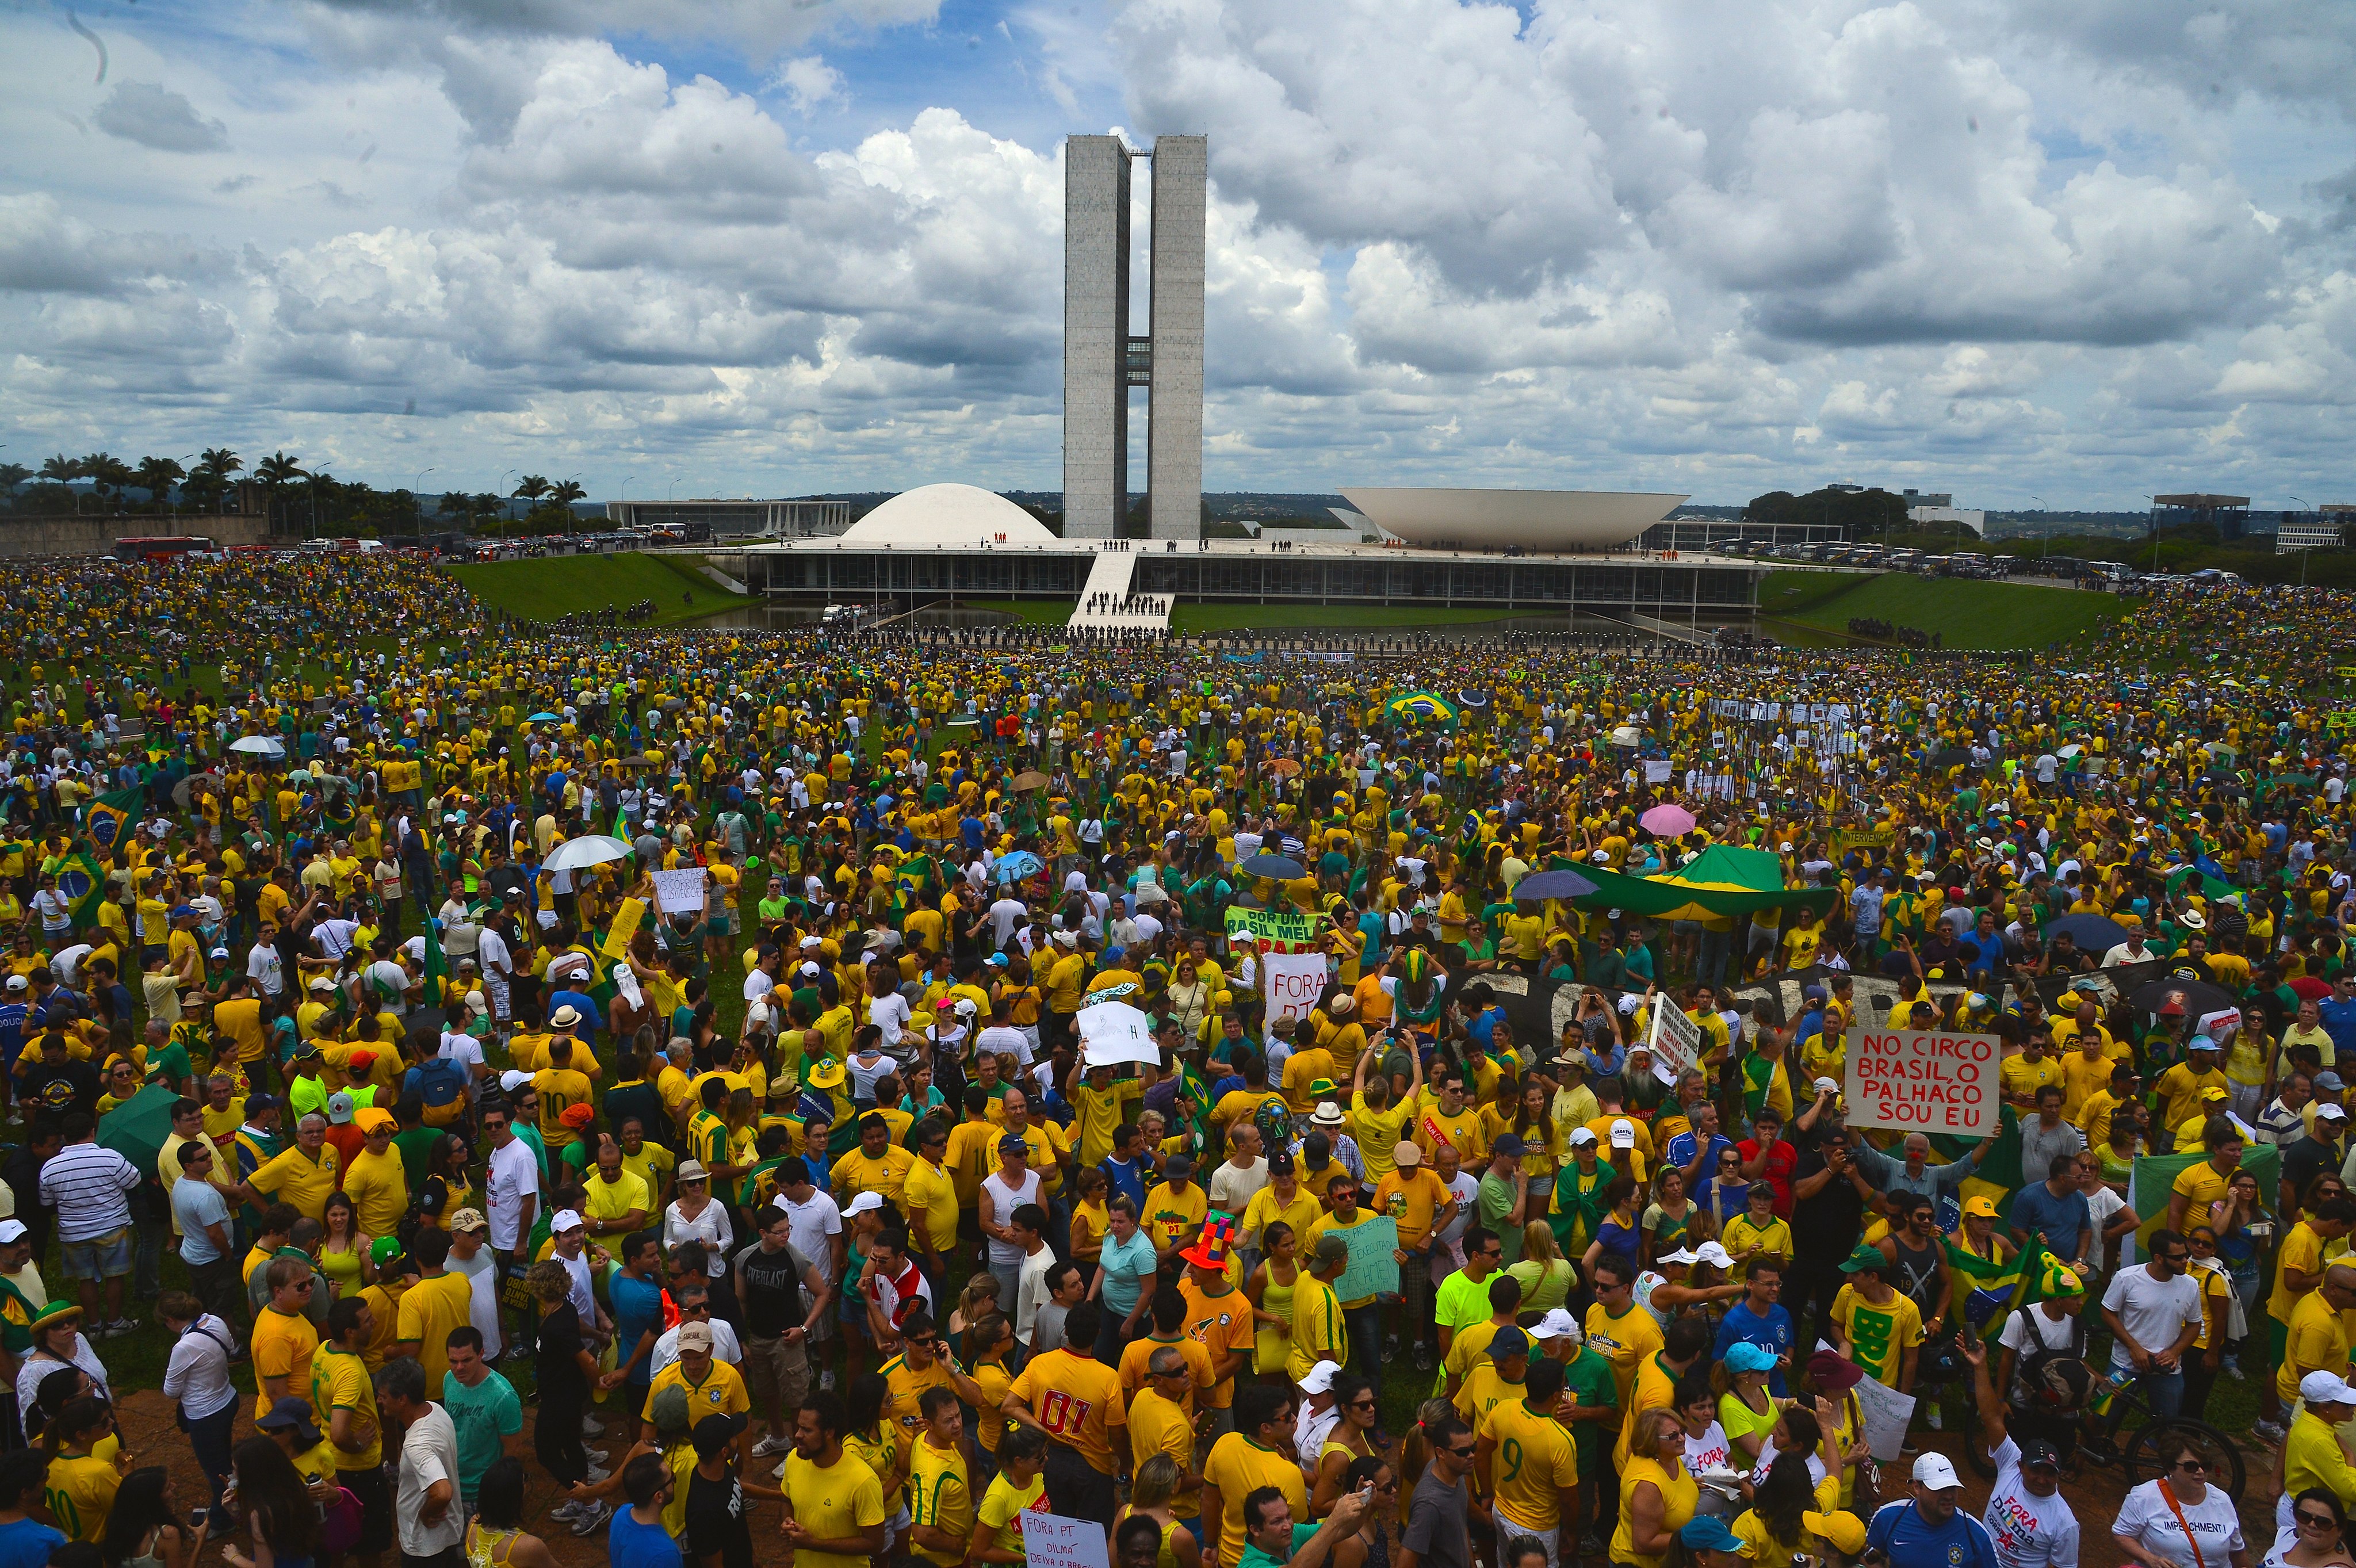 A large crowd of anti-corruption protesters dressed predominantly in the yellow and green of the Brazilian flag stands in front of the Congresso Nacional, designed by Oscar Niemeyer, in Brasilia, Brazil.